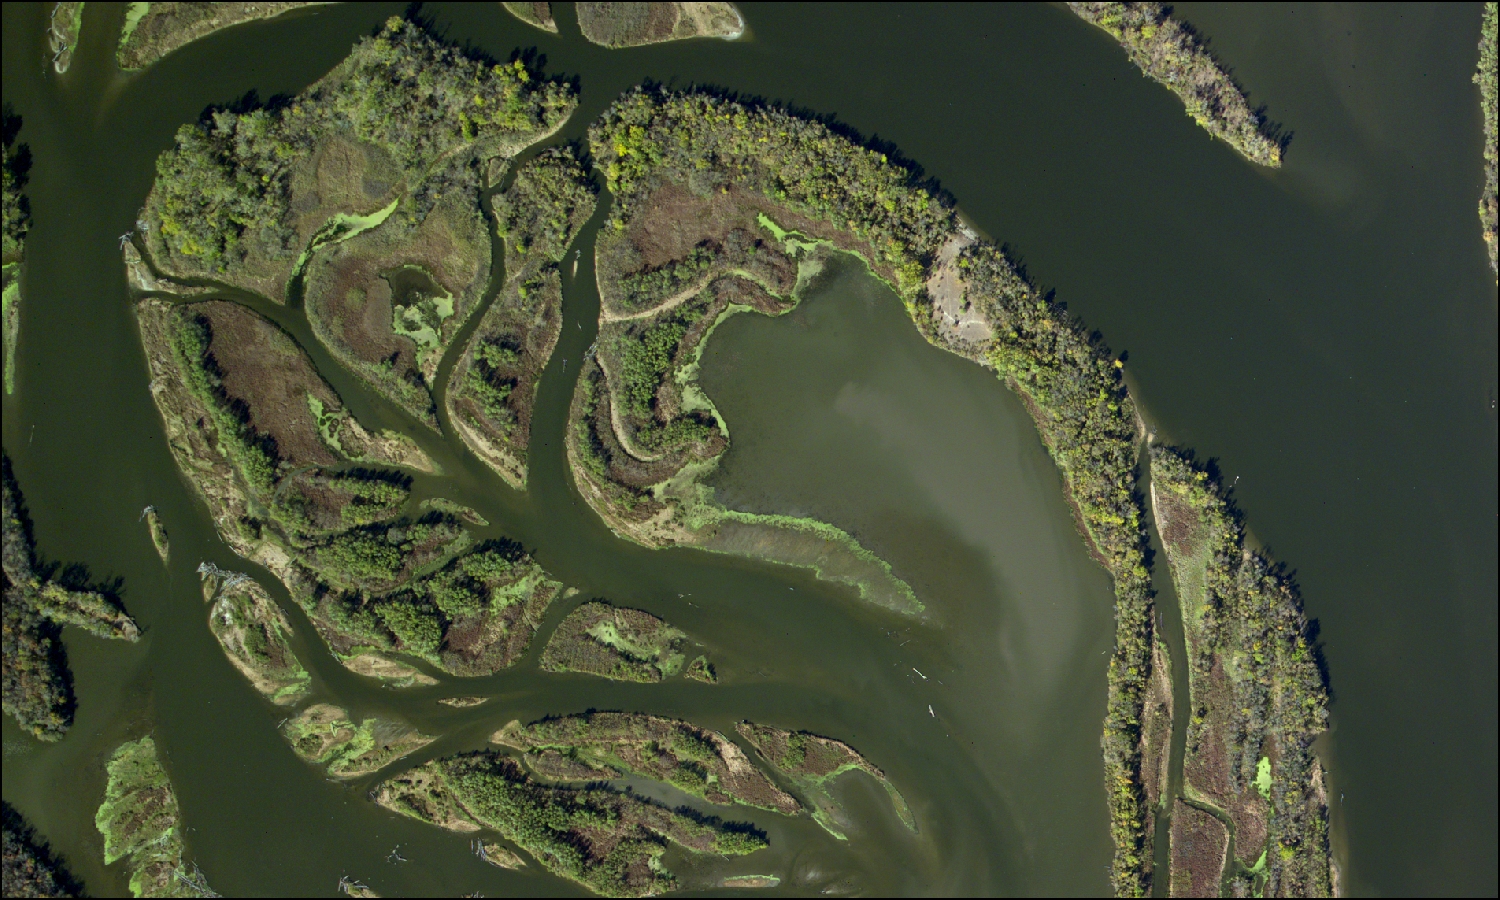 The island complex at the north end of Spring Lake, Pool 2, in the Mississippi National River and Recreation Area shows a variety of floodplain forests, wetlands, and aquatic vegetation (four-band digital image including red, green, blue, and near-infrared).